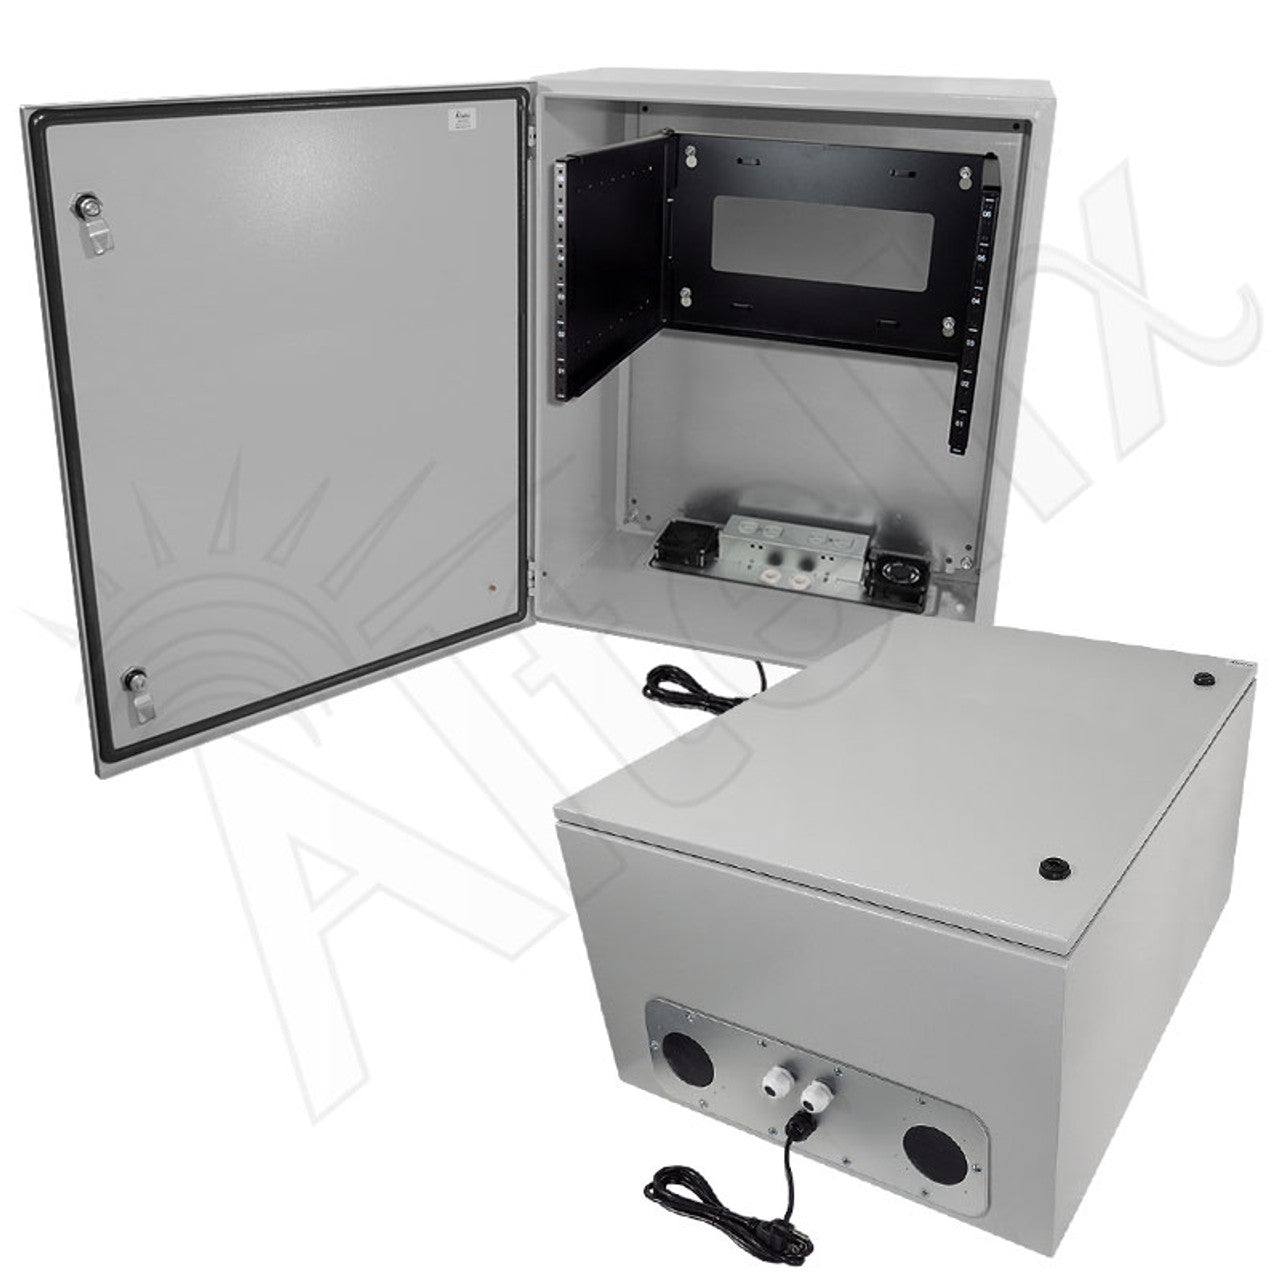 Altelix 19" Wide 6U Rack Steel Weatherproof NEMA Enclosure with Dual Cooling Fans, 120 VAC Outlets and Power Cord